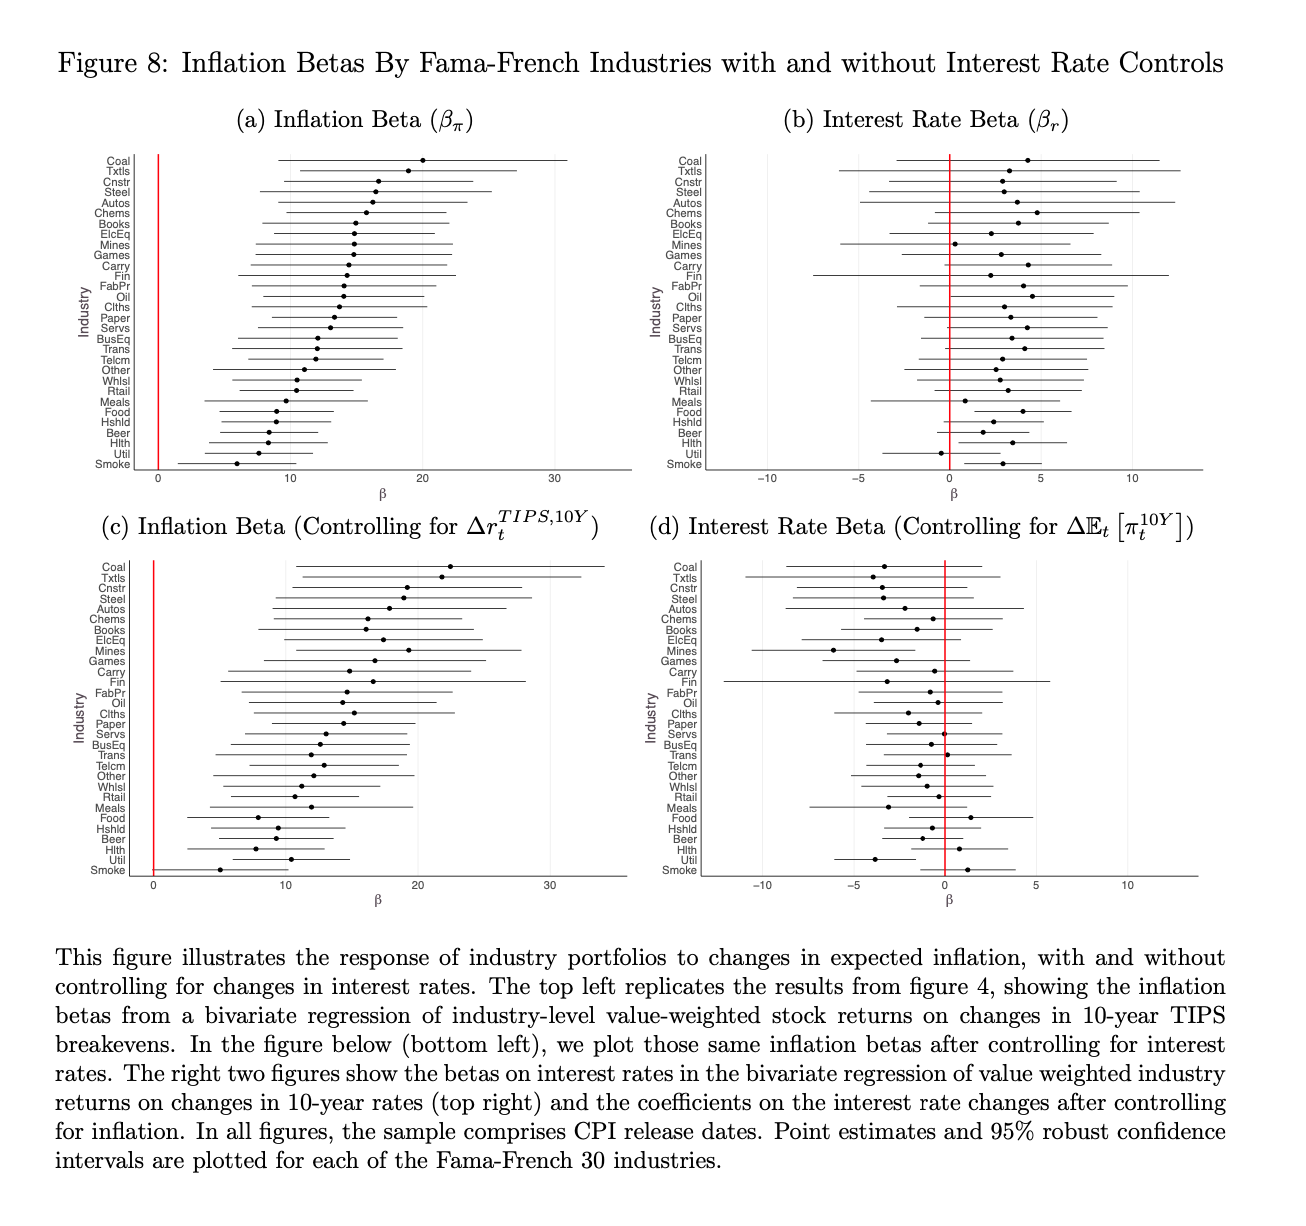 inflation betas by fama-french industries with and without interest rate controls